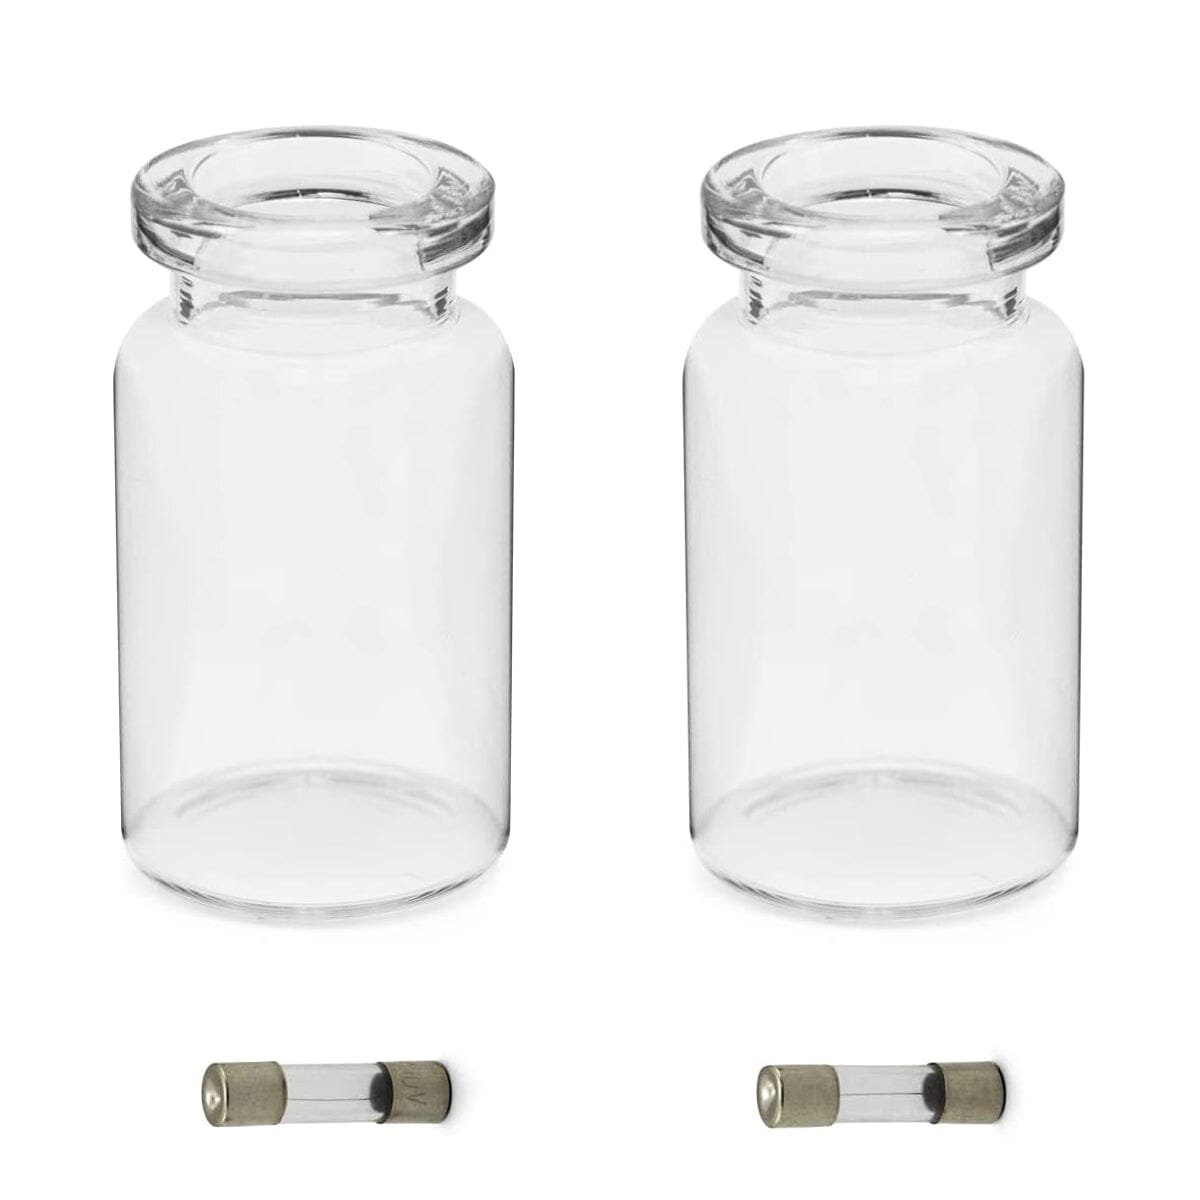 Hydra Facial Machine Replacement Vials Flask Kit Pack of 2 with Fuse Bruun Beauty 